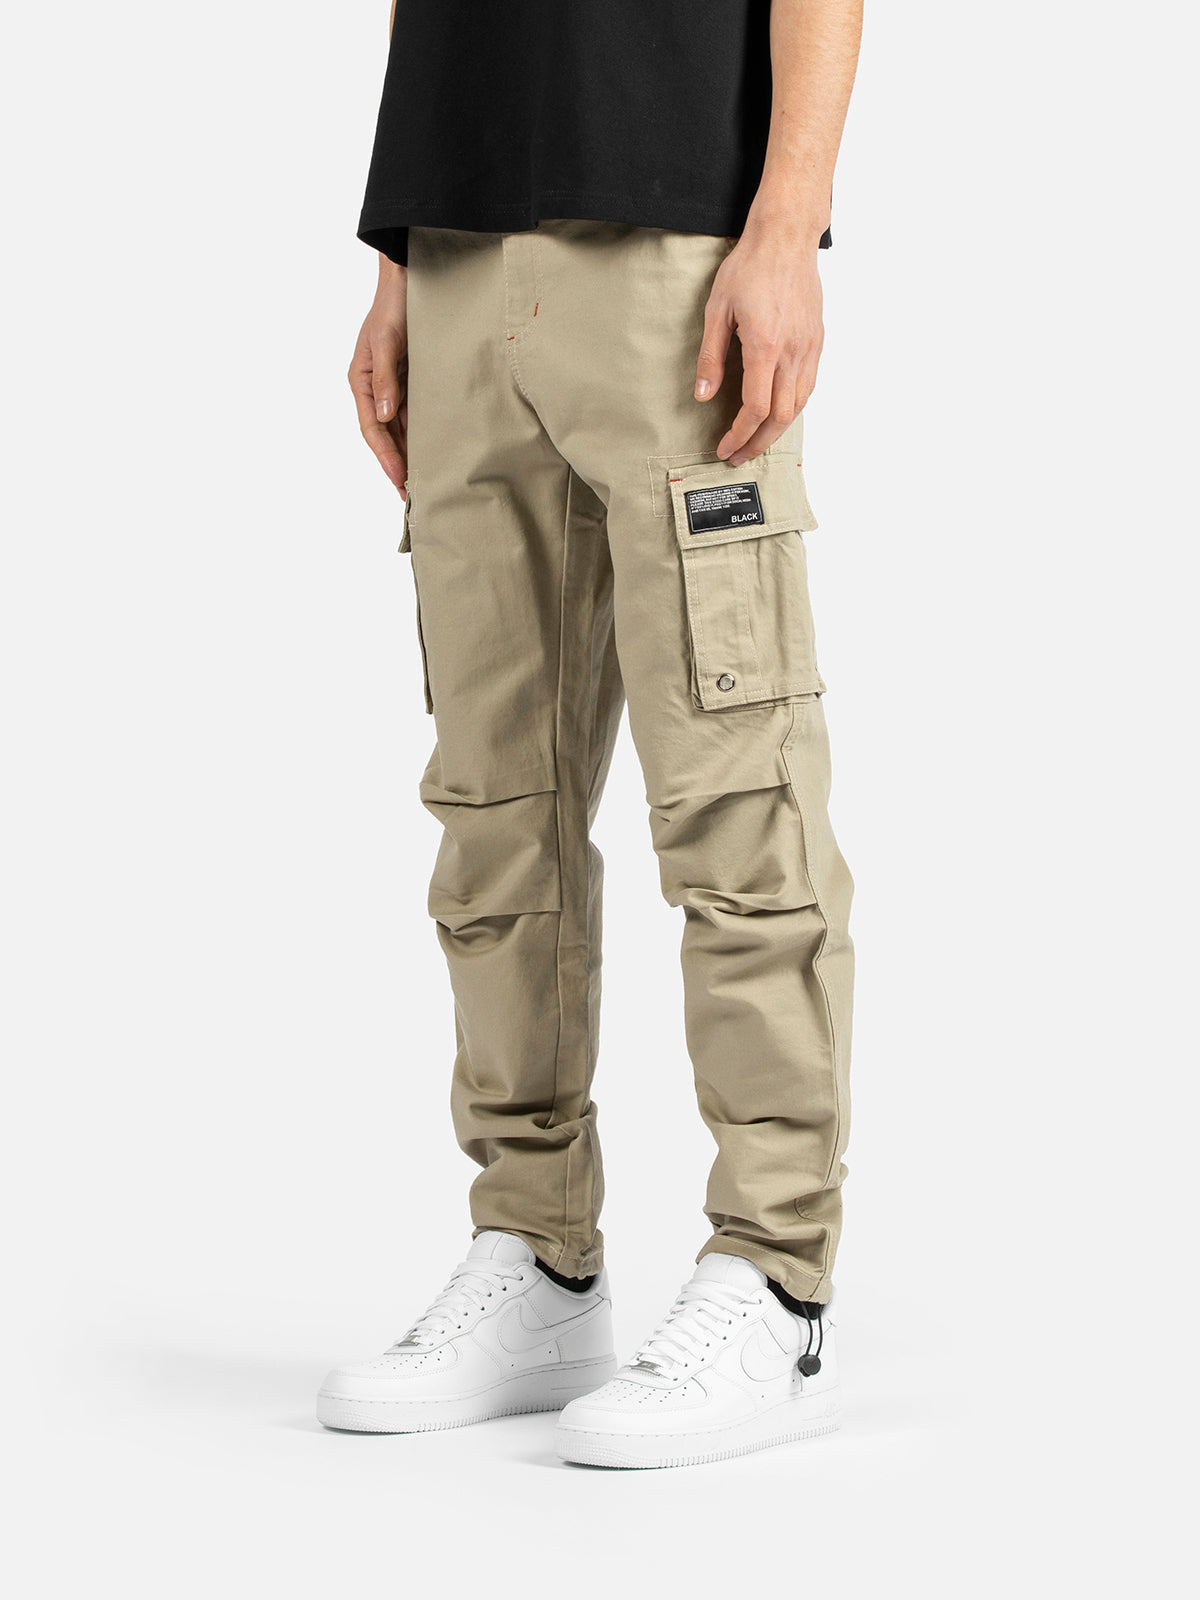 Eagle Bend Cargo Trousers in Khaki | Trousers | Dickies UK.